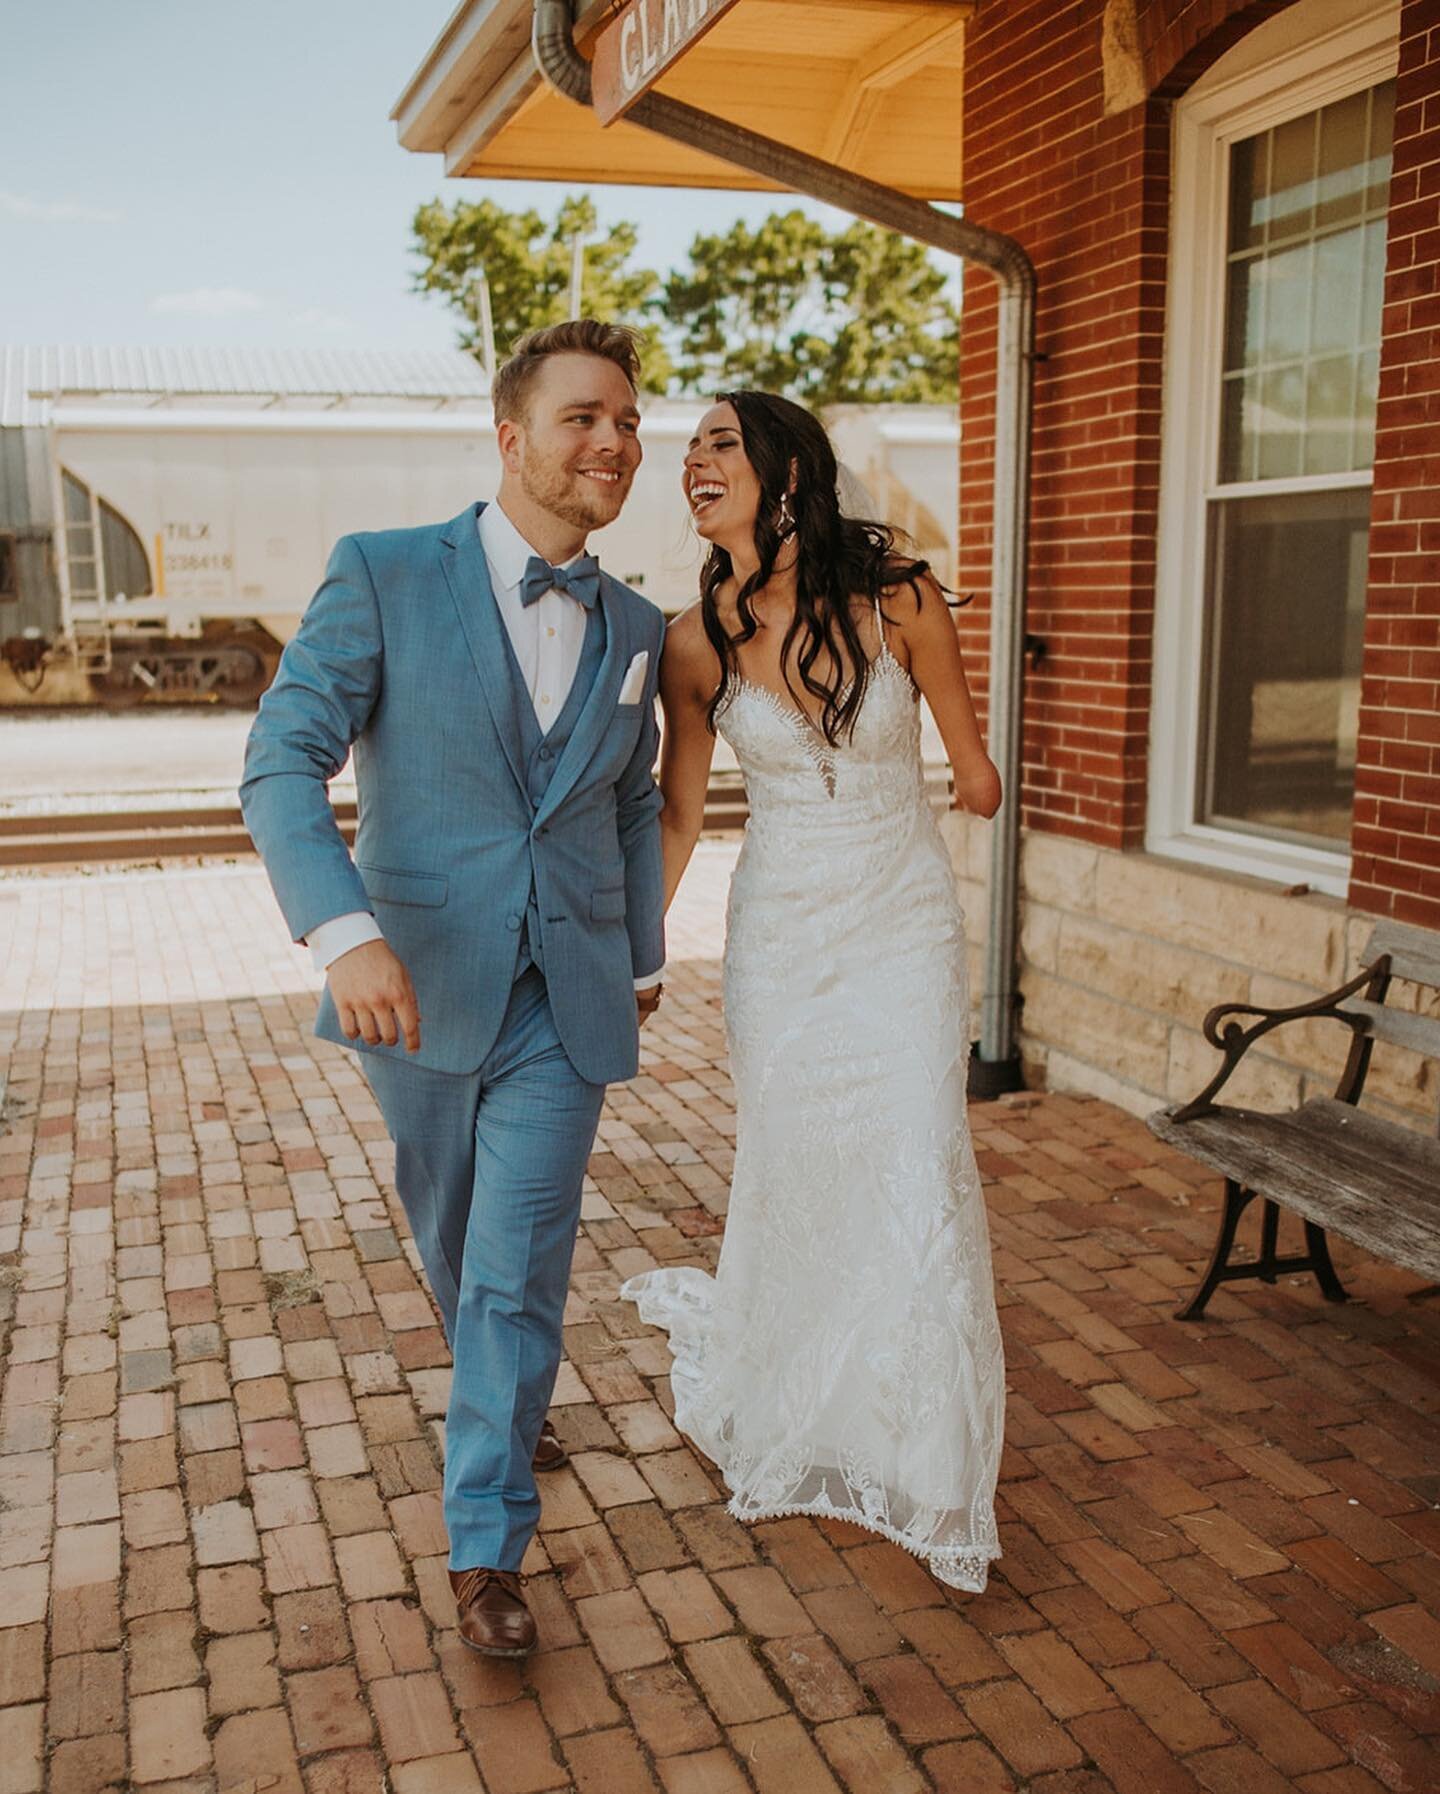 Finally sent off this gallery of this gorgeous wedding day even though technology was trying to stop me! 😉

But for real every minute spent staring at a spinning wheel was worth it for these photos! These two have the biggest and kindest hearts and 